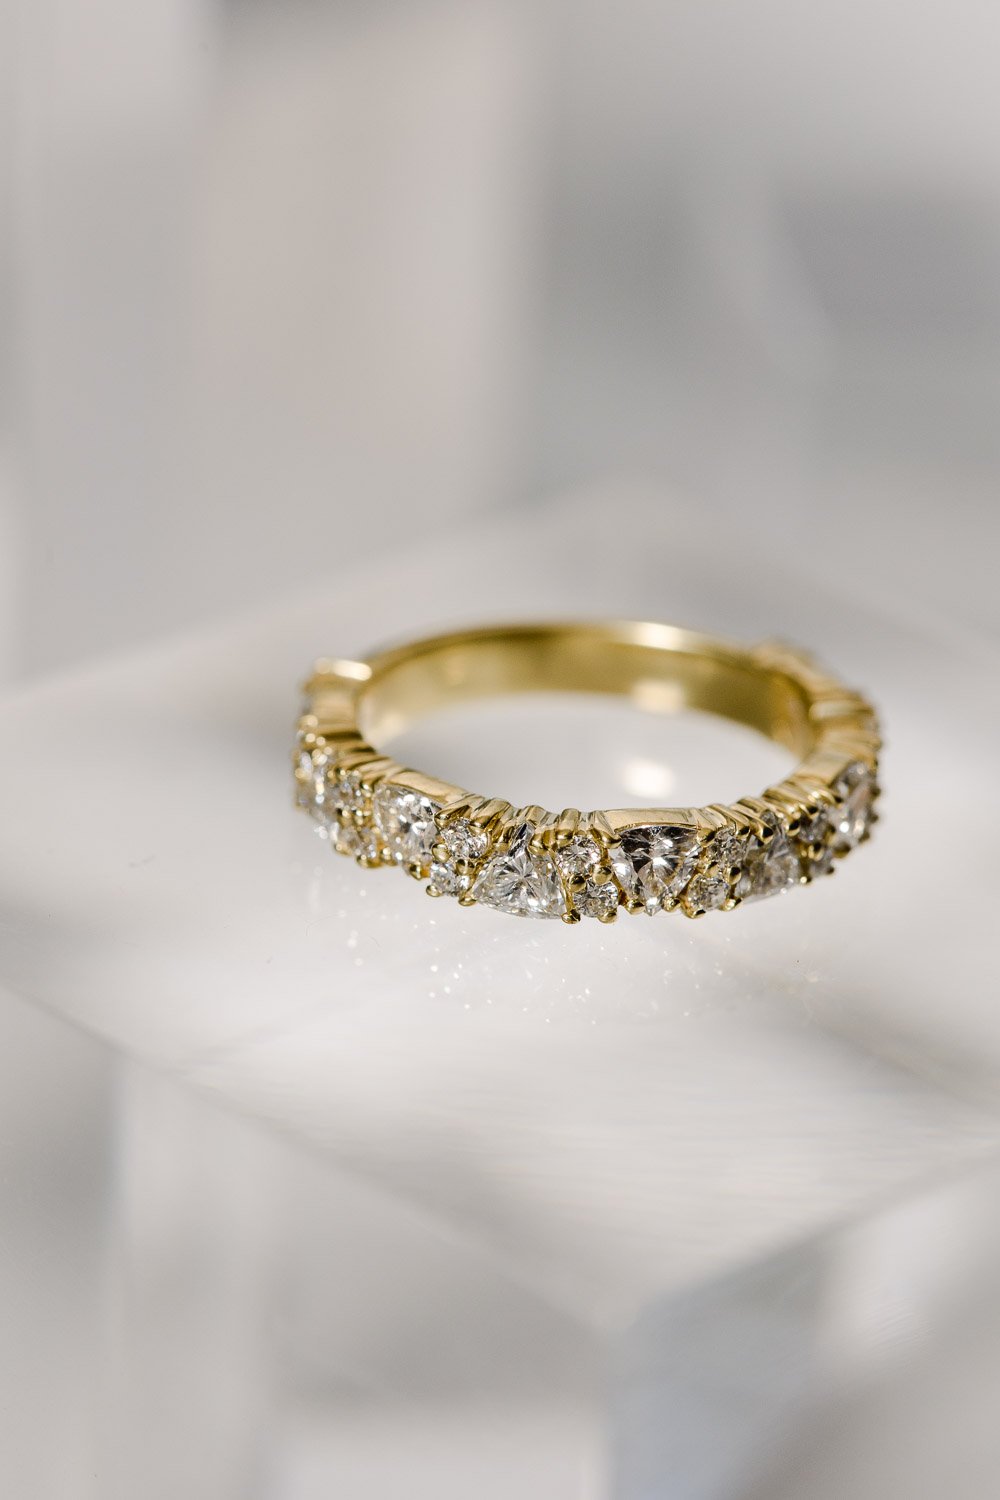 Custom made trillion and round cut diamond and yellow gold wedding band designed by Alexandria &amp; Company 